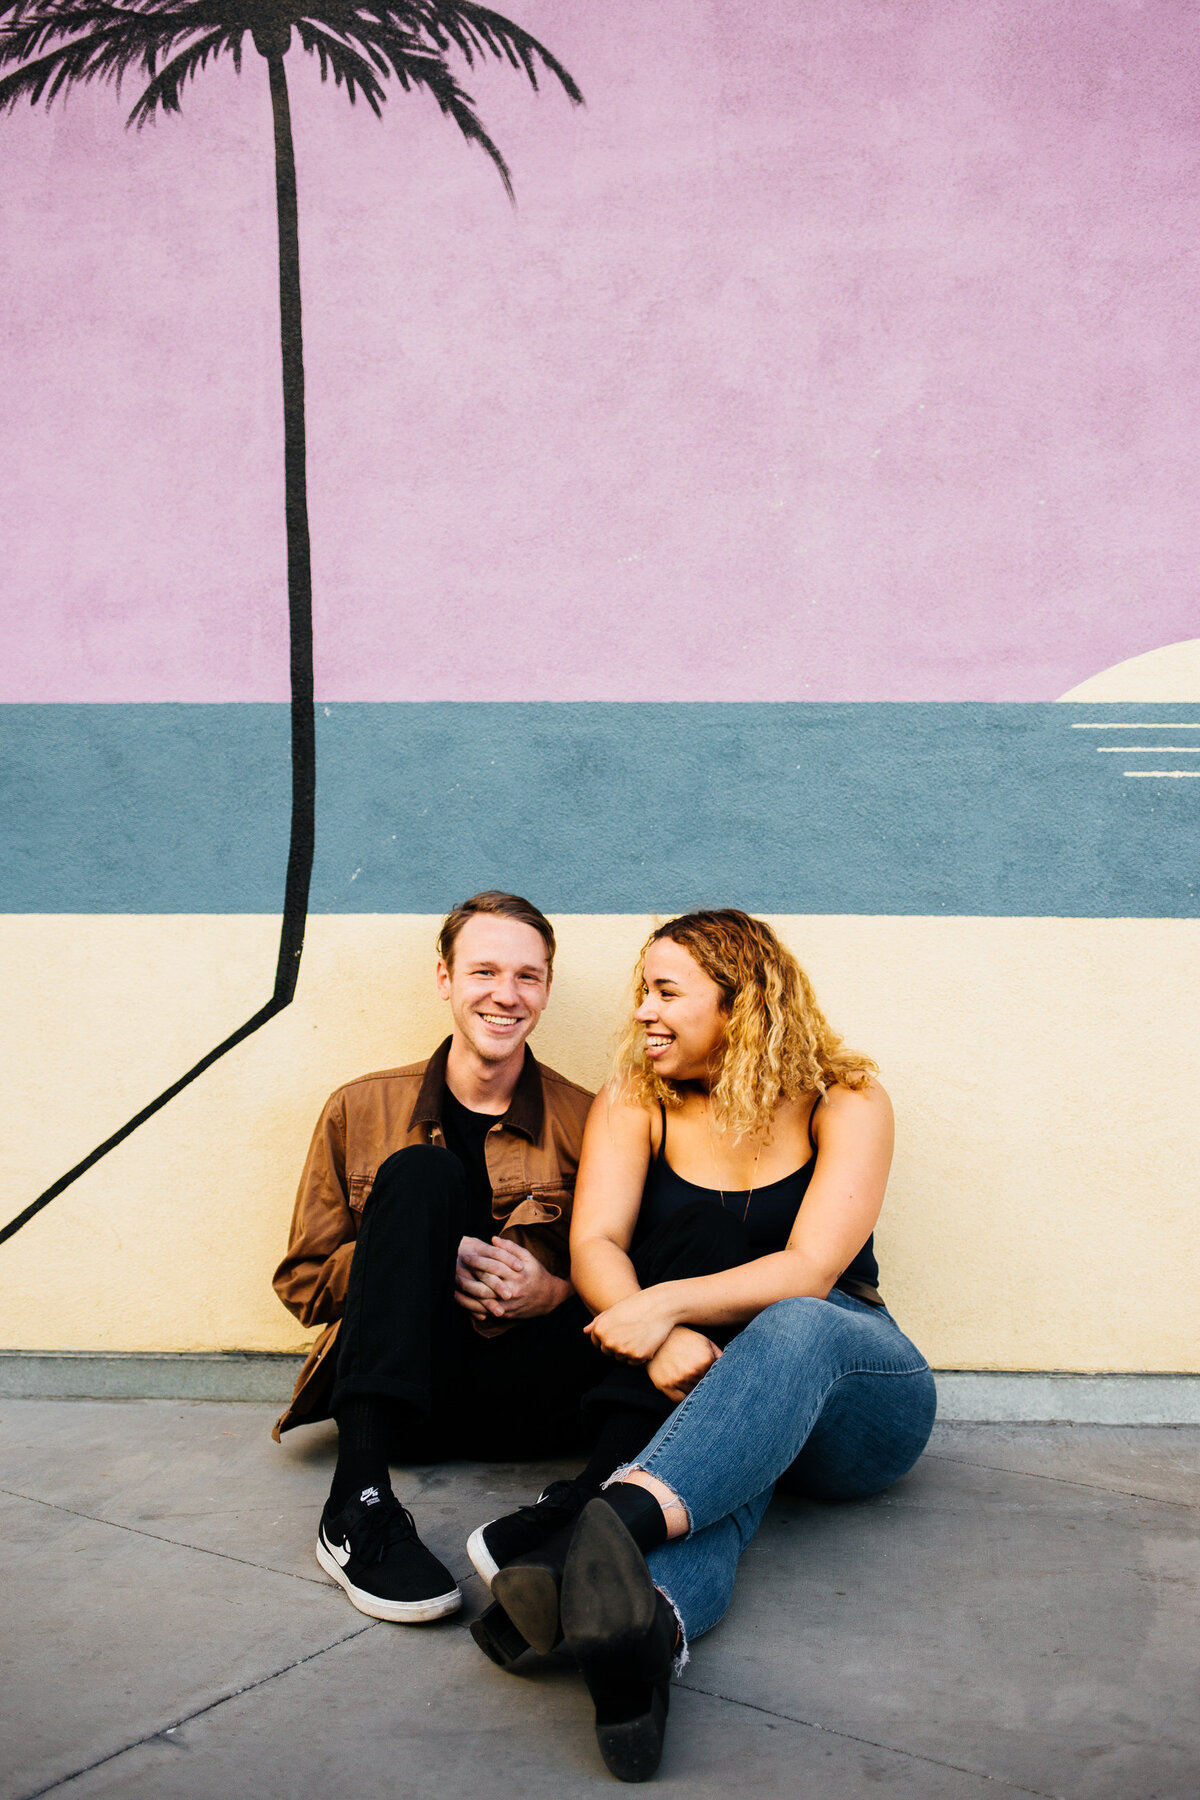 downtown-los-angeles-arts-district-engagement-photos-dtla-engagement-photos-los-angeles-wedding-photographer-erin-marton-photography-12